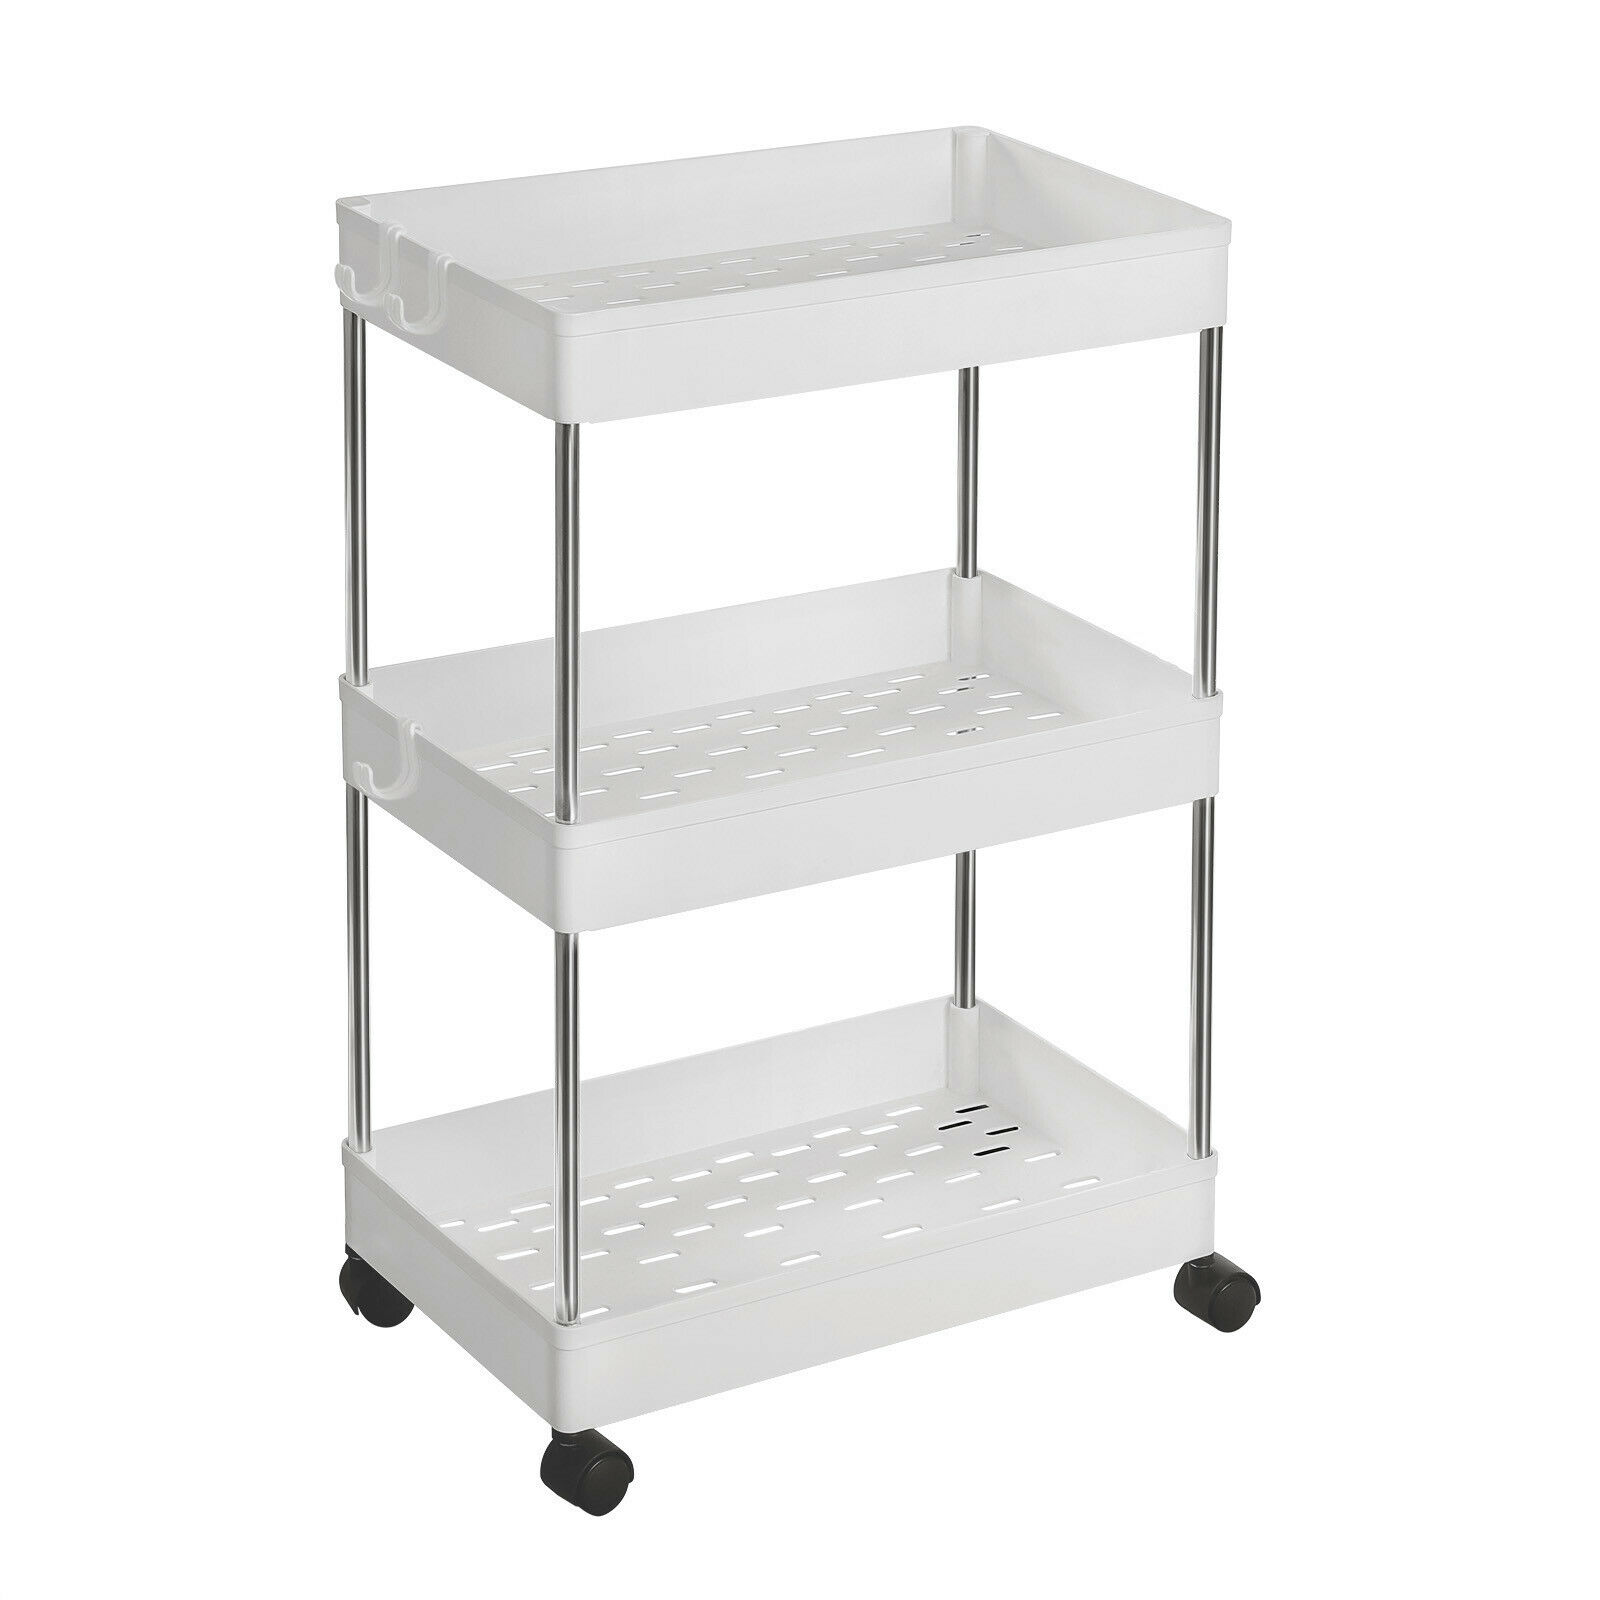 3-Tier Rolling Cart, Storage Cart with Wheels UKSC009W01